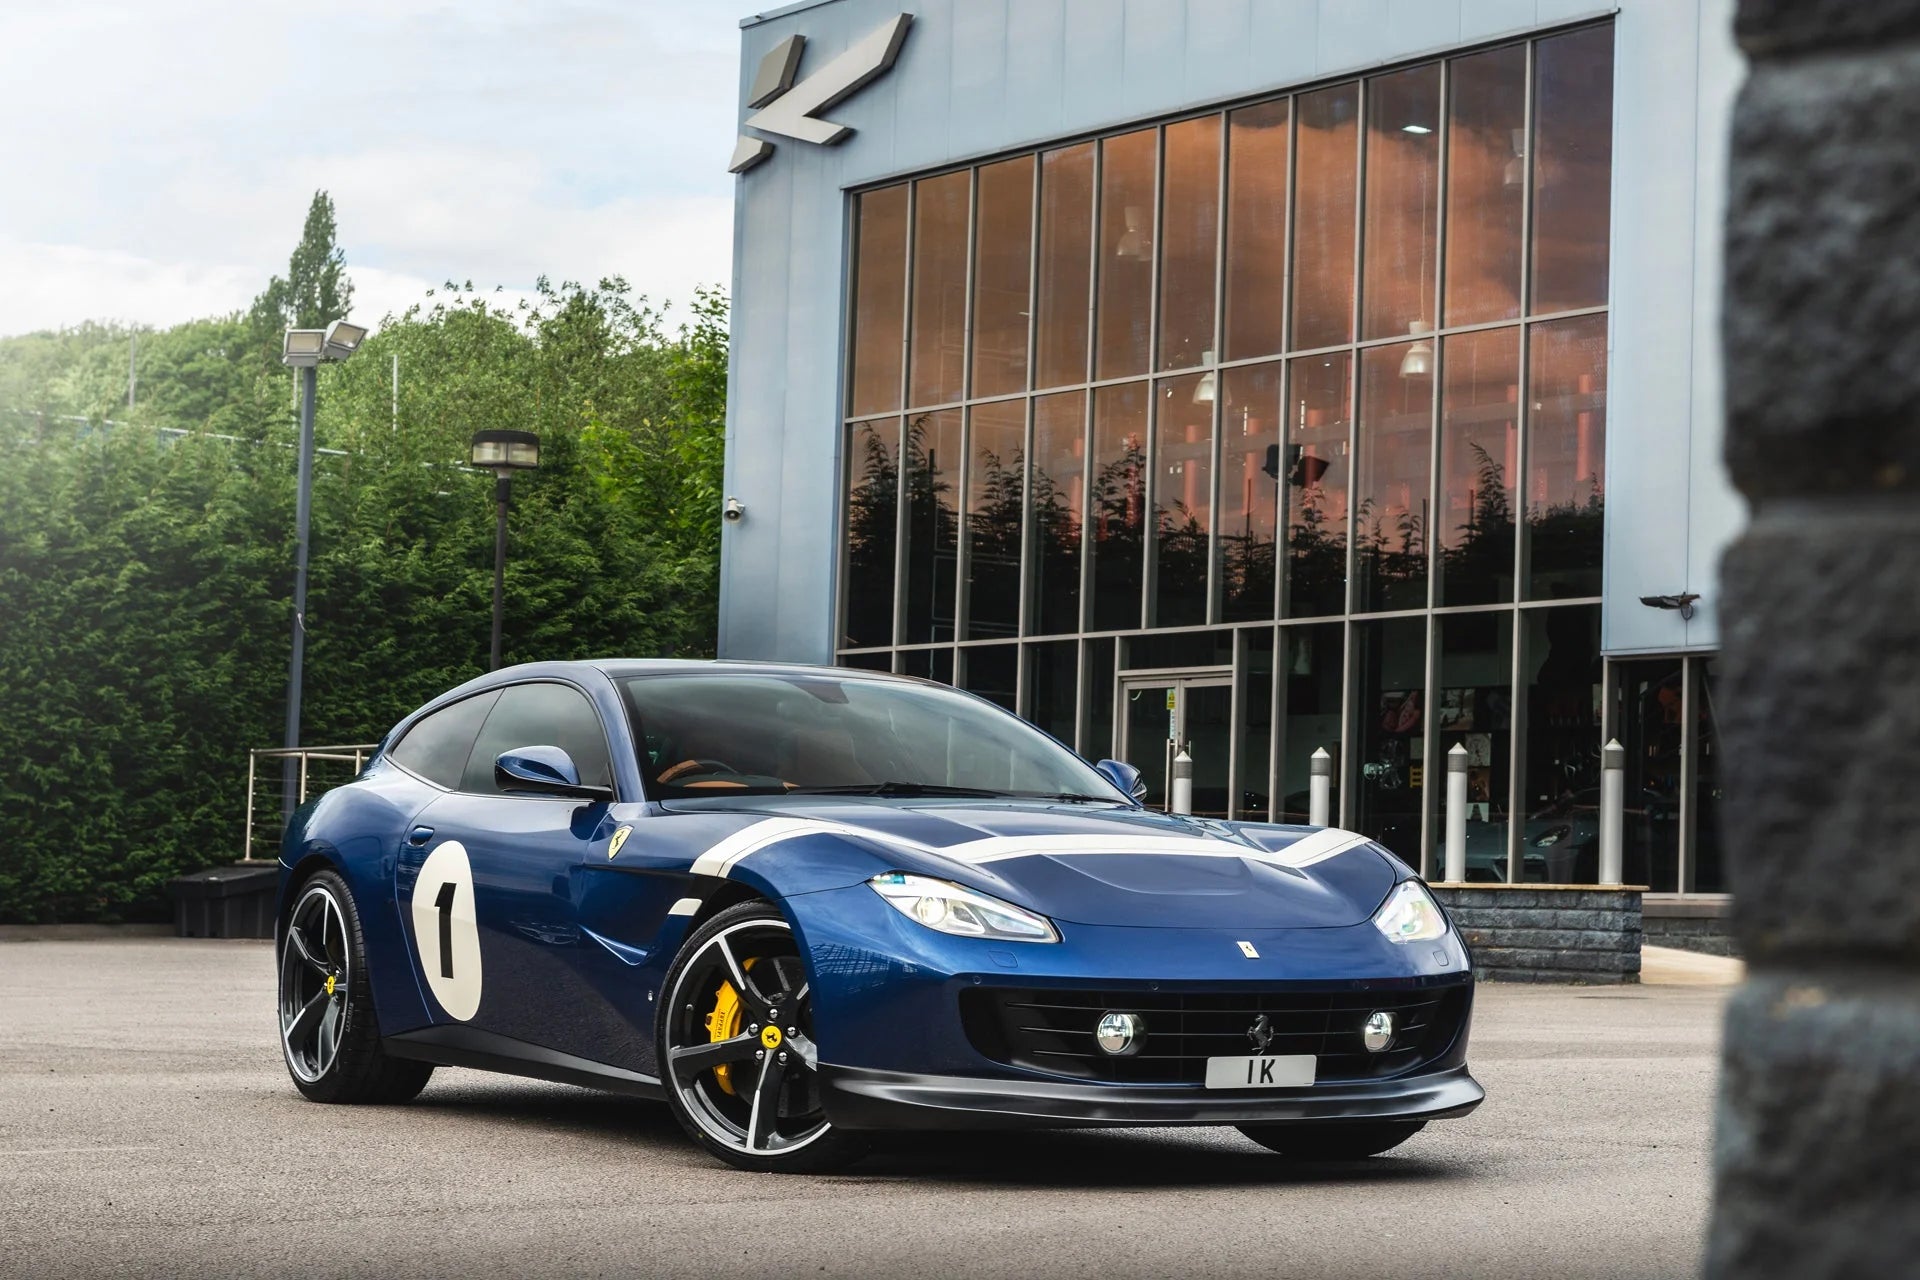 TAILOR-MADE: *GTC4LUSSO // PK - 03